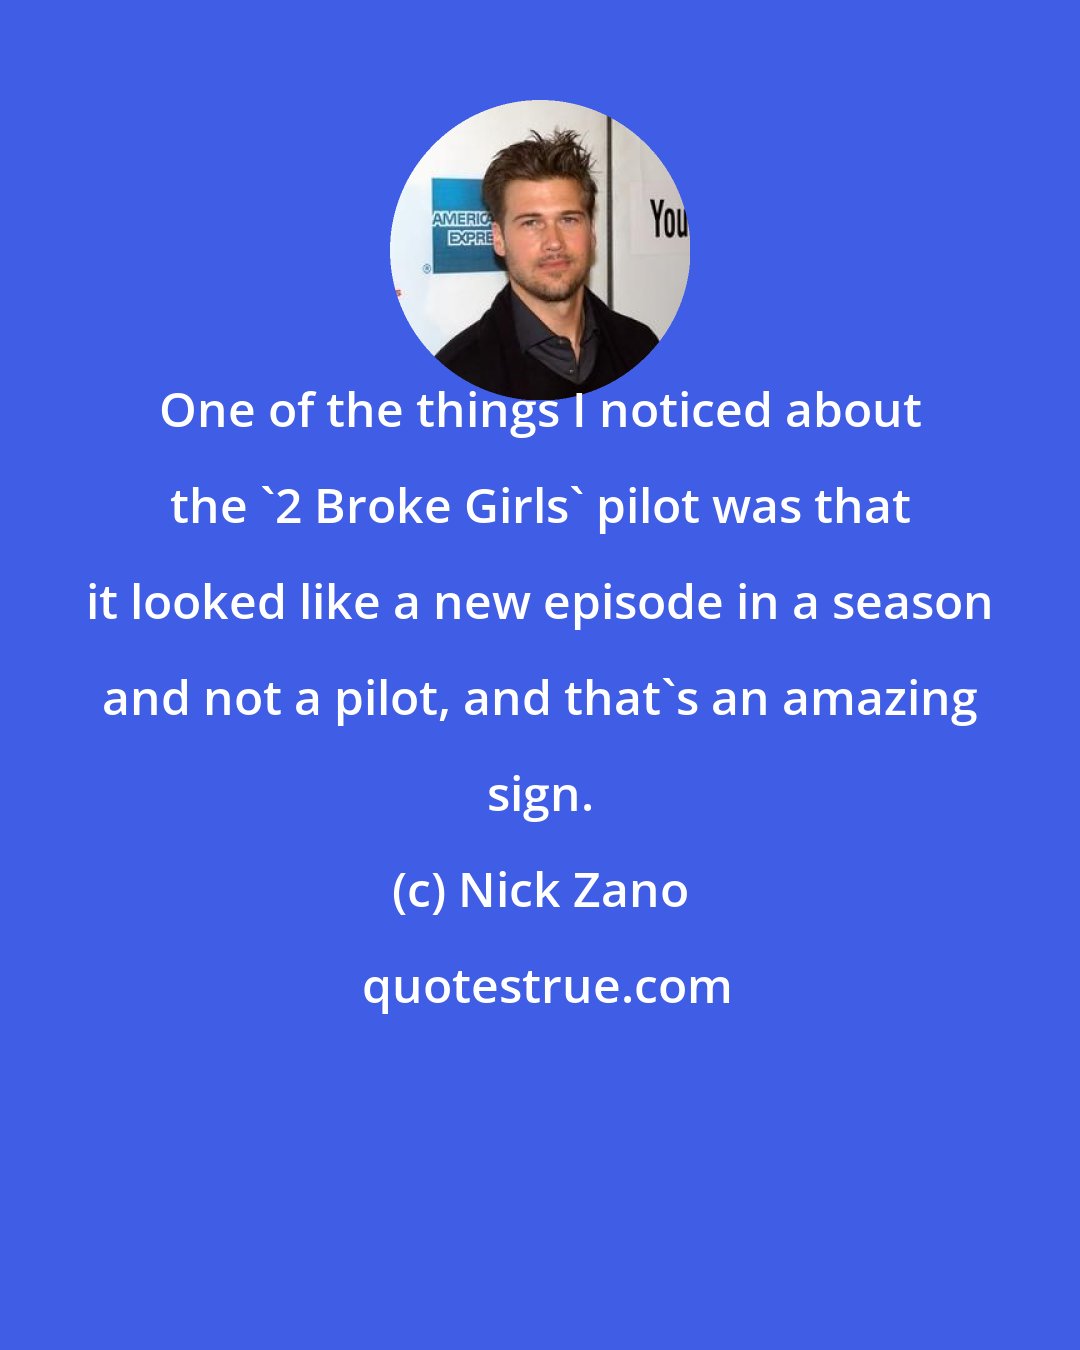 Nick Zano: One of the things I noticed about the '2 Broke Girls' pilot was that it looked like a new episode in a season and not a pilot, and that's an amazing sign.